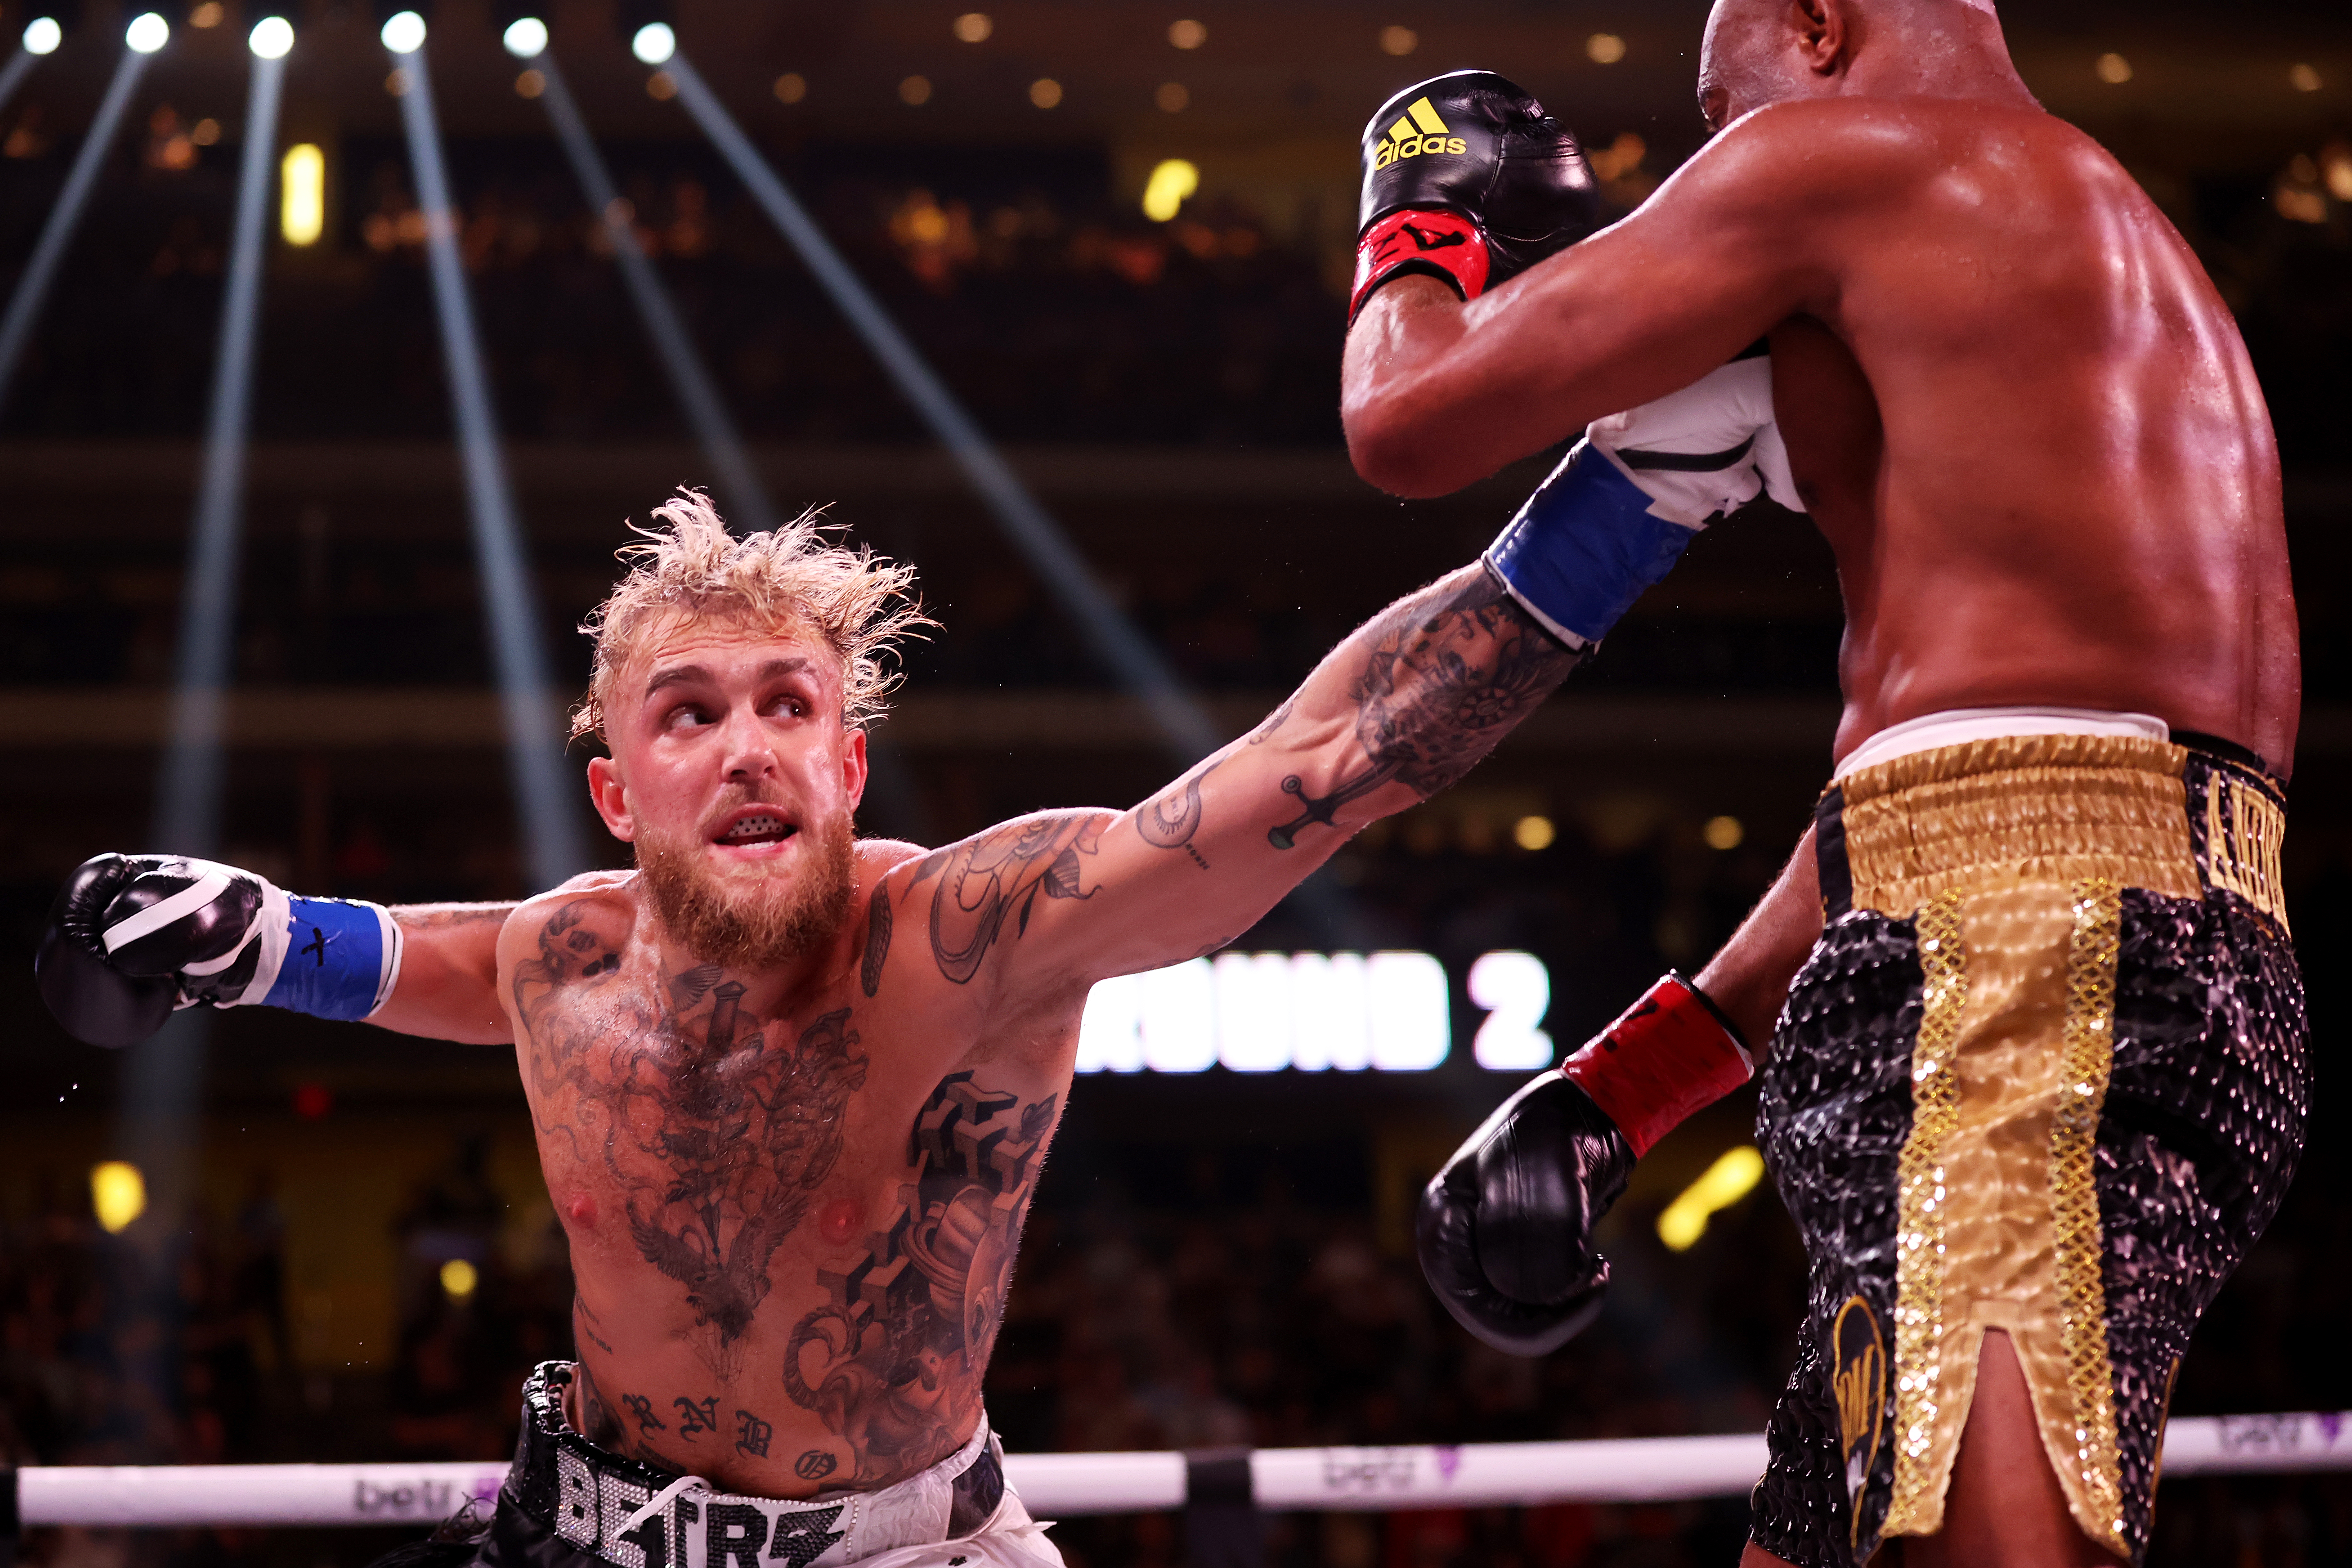 Jake Paul vs. Tommy Fury might actually happen on February 25, 2023